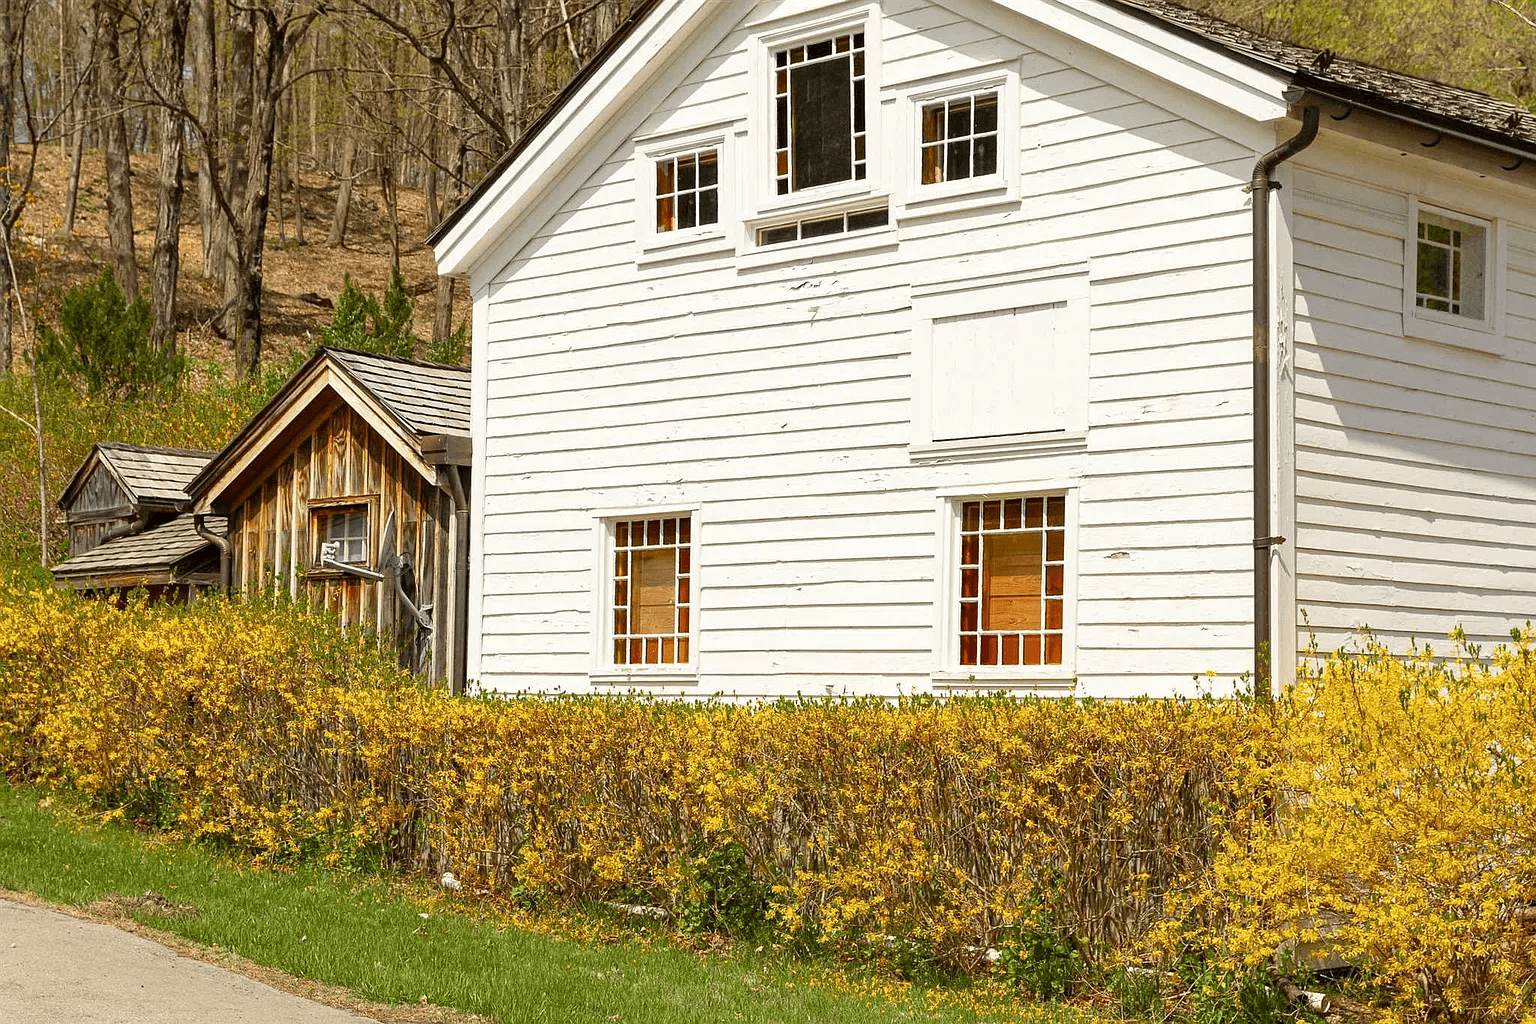 exterior of the house with stained glass windows visible